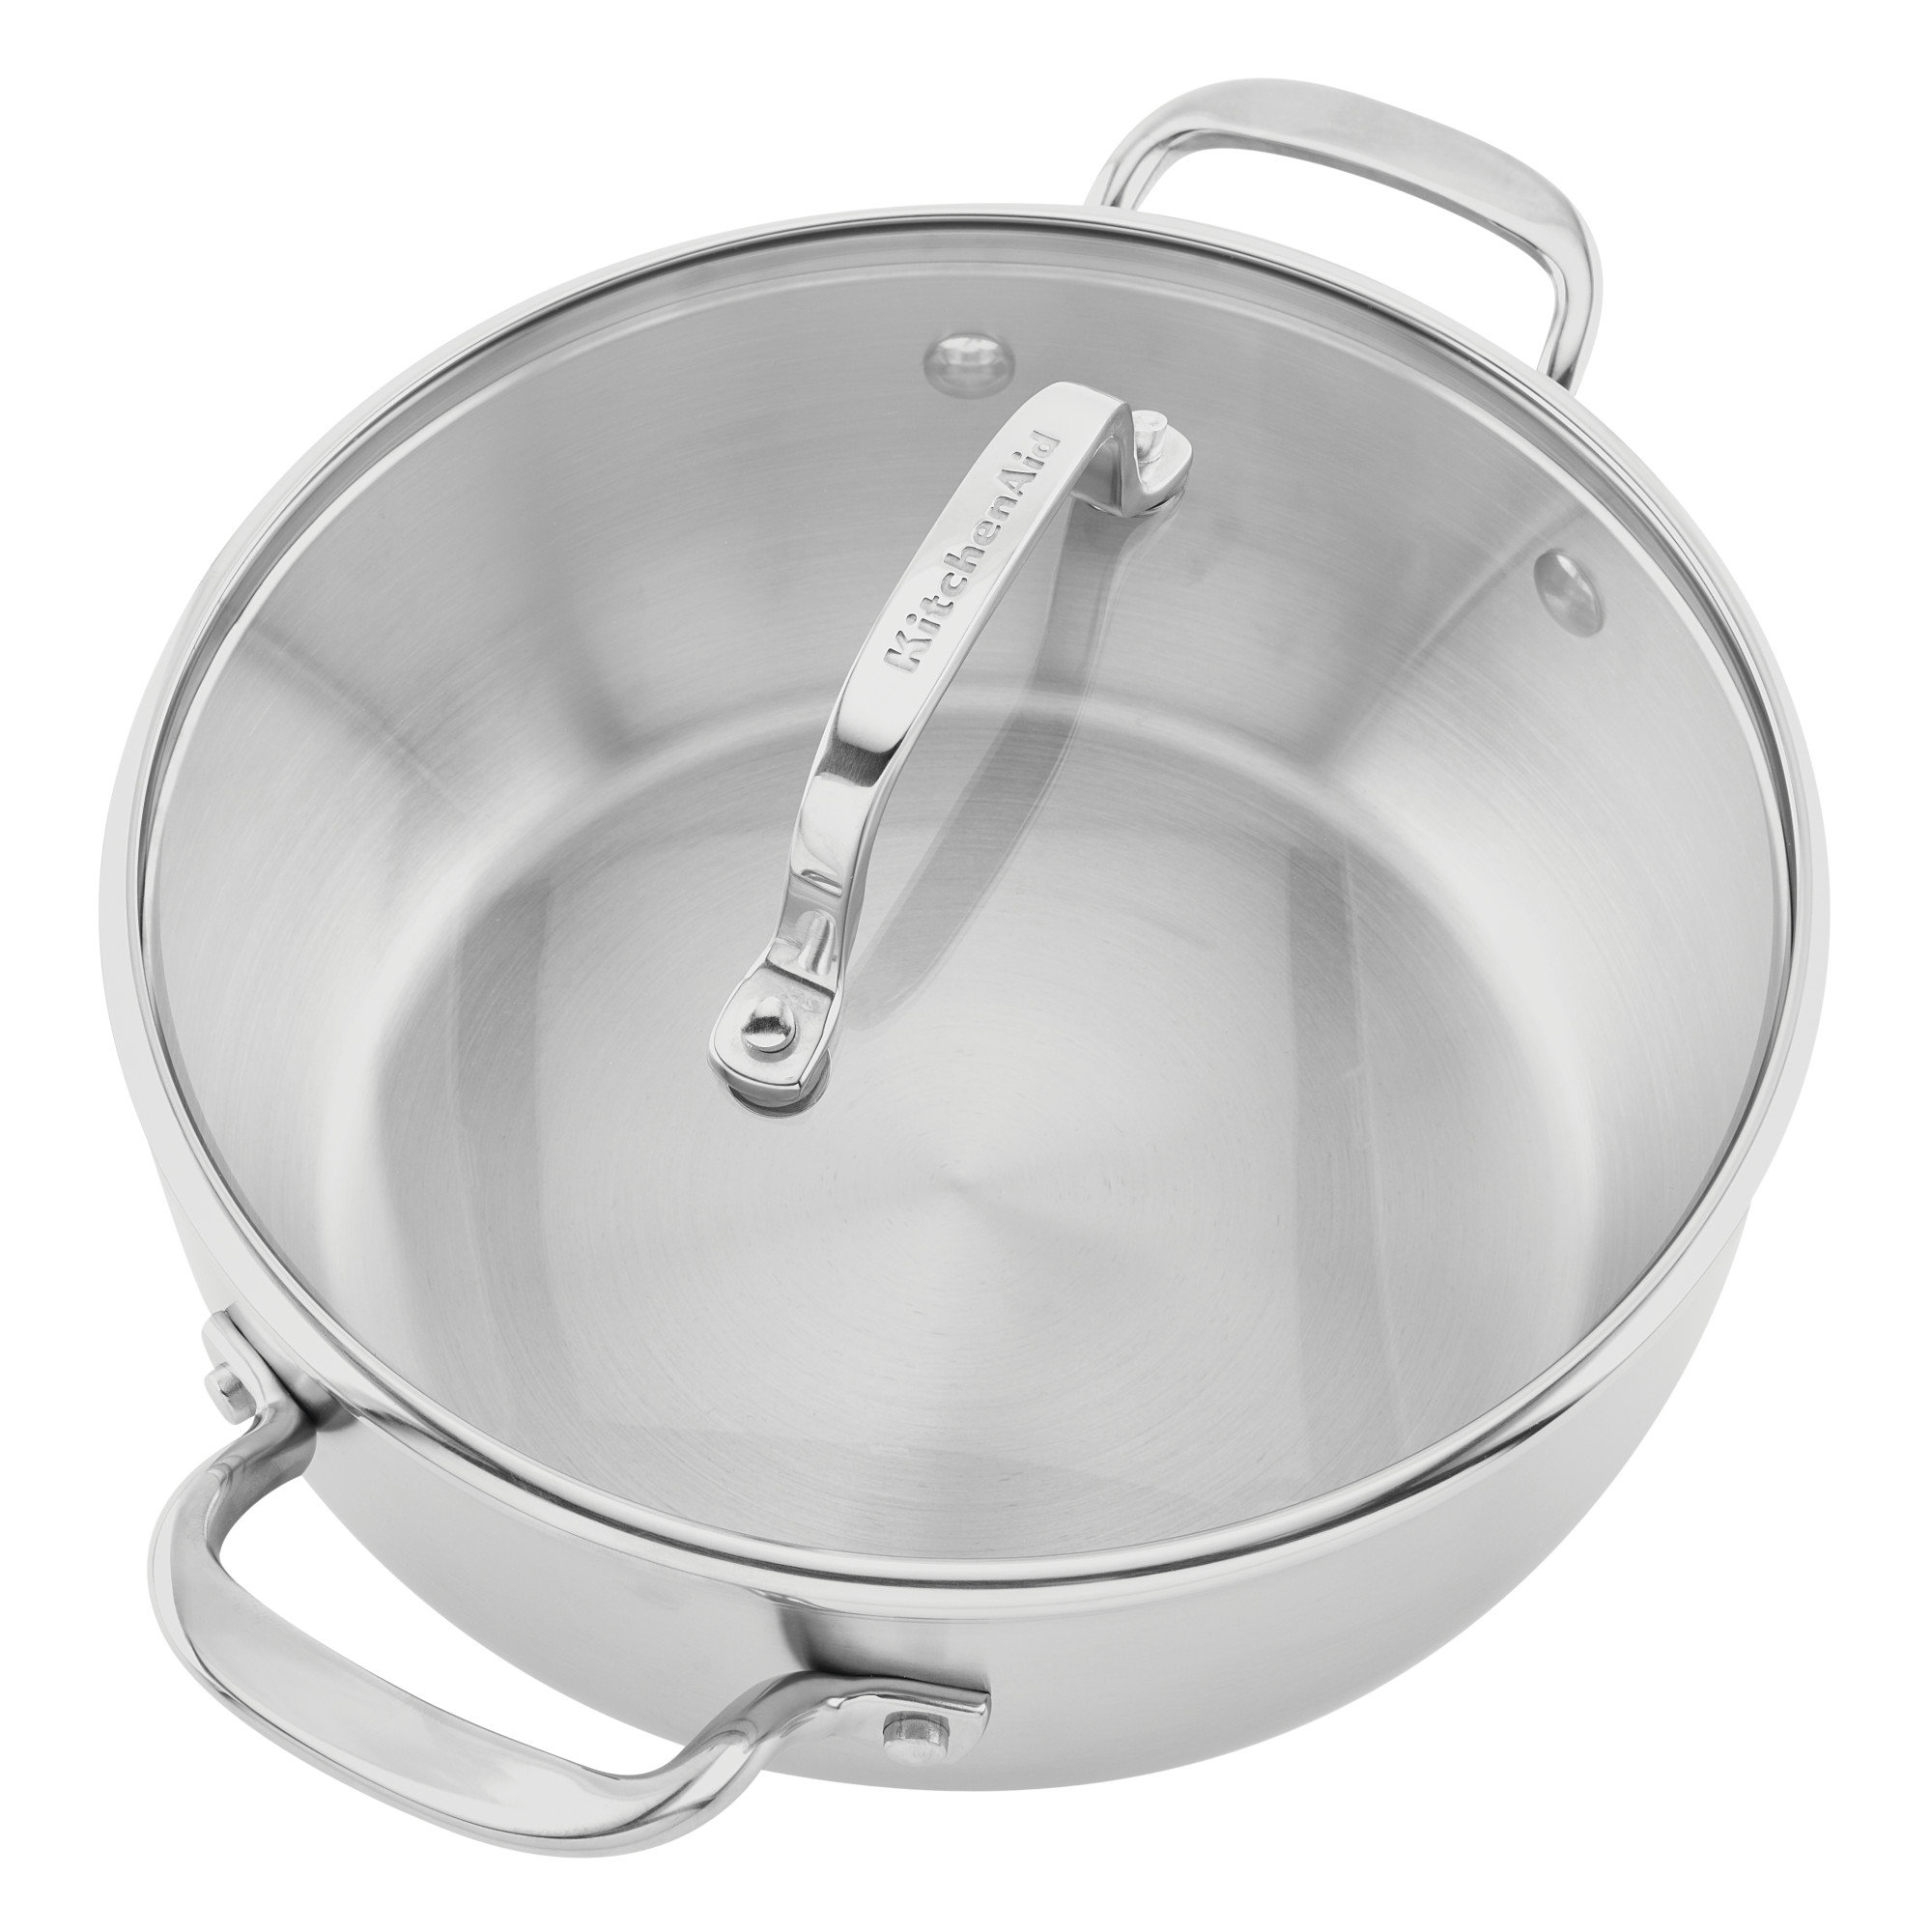 KitchenAid 3-Ply Base Stainless Steel Casserole with Lid, 4-Quart, Brushed  Stainless Steel & Reviews